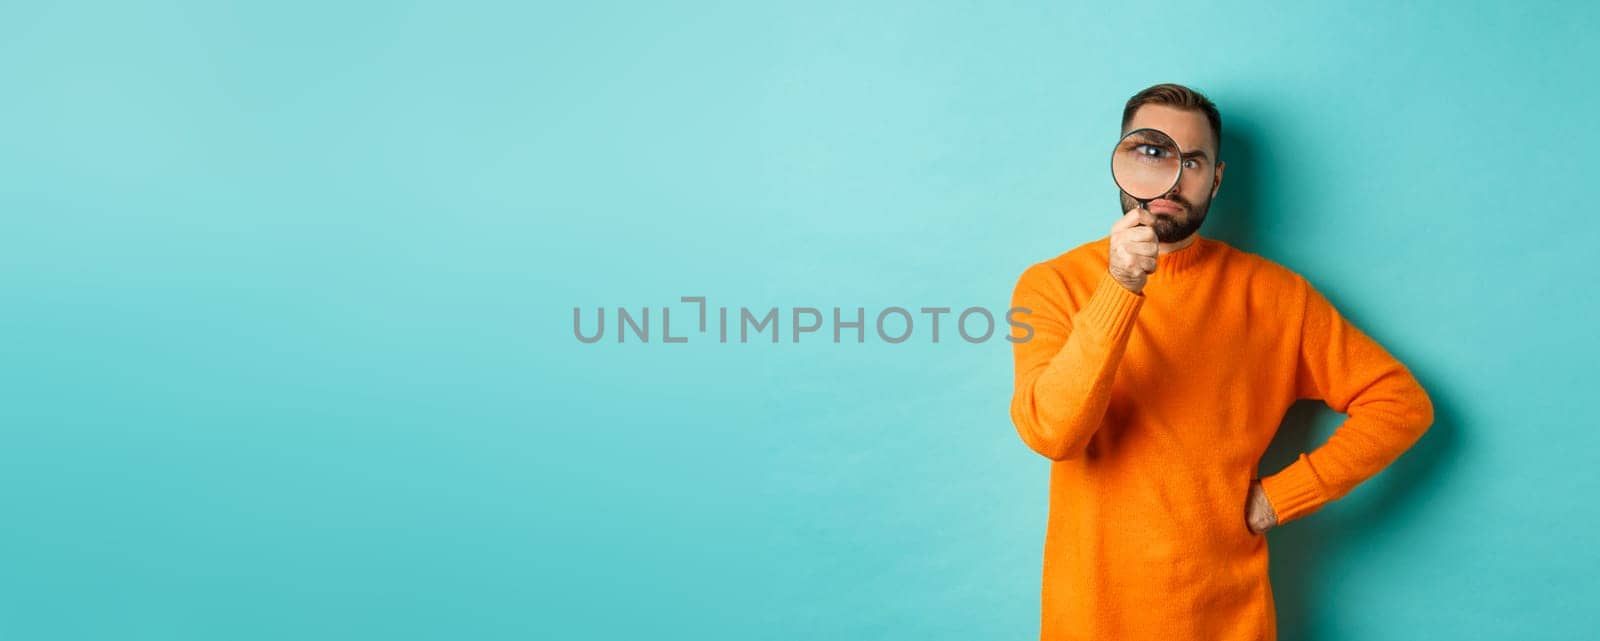 Funny man looking serious through magnifying glass, inspecting something, standing in orange sweater against turquoise background.